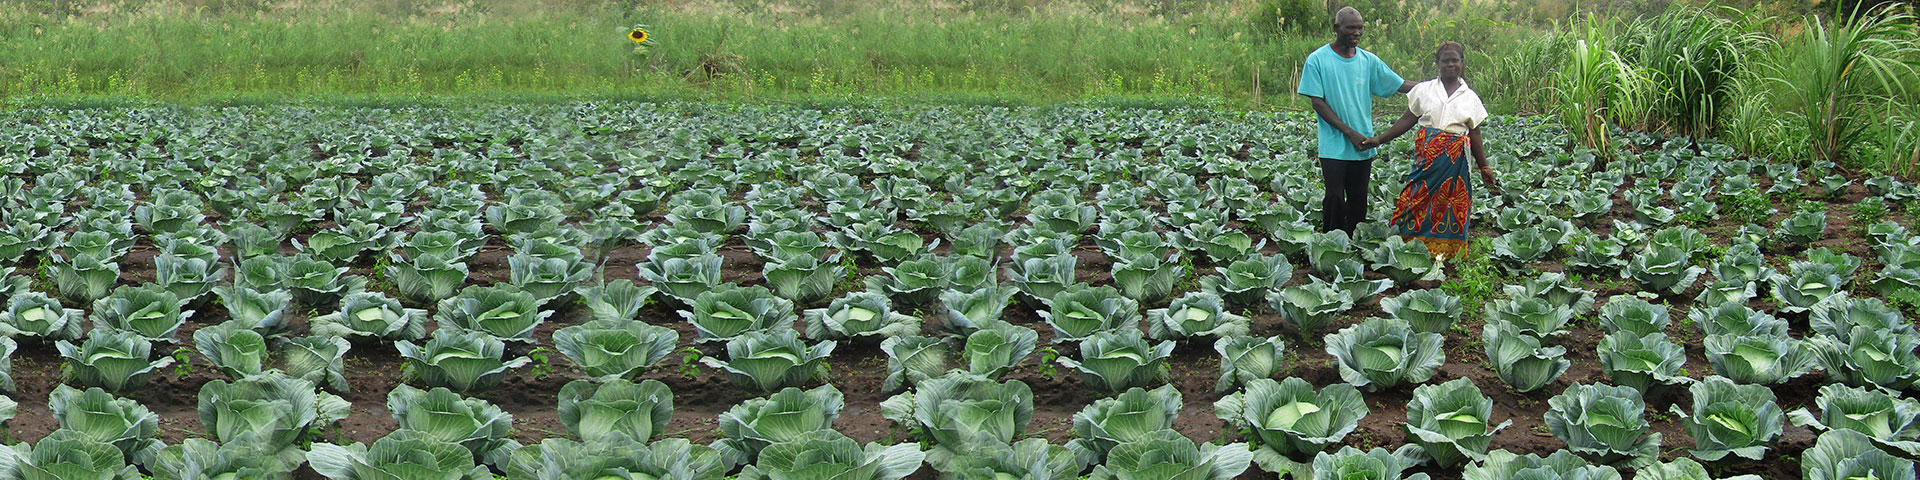 Vegetable growing by small farmers with improved seeds in Zambia  © GIZ, C-NRM